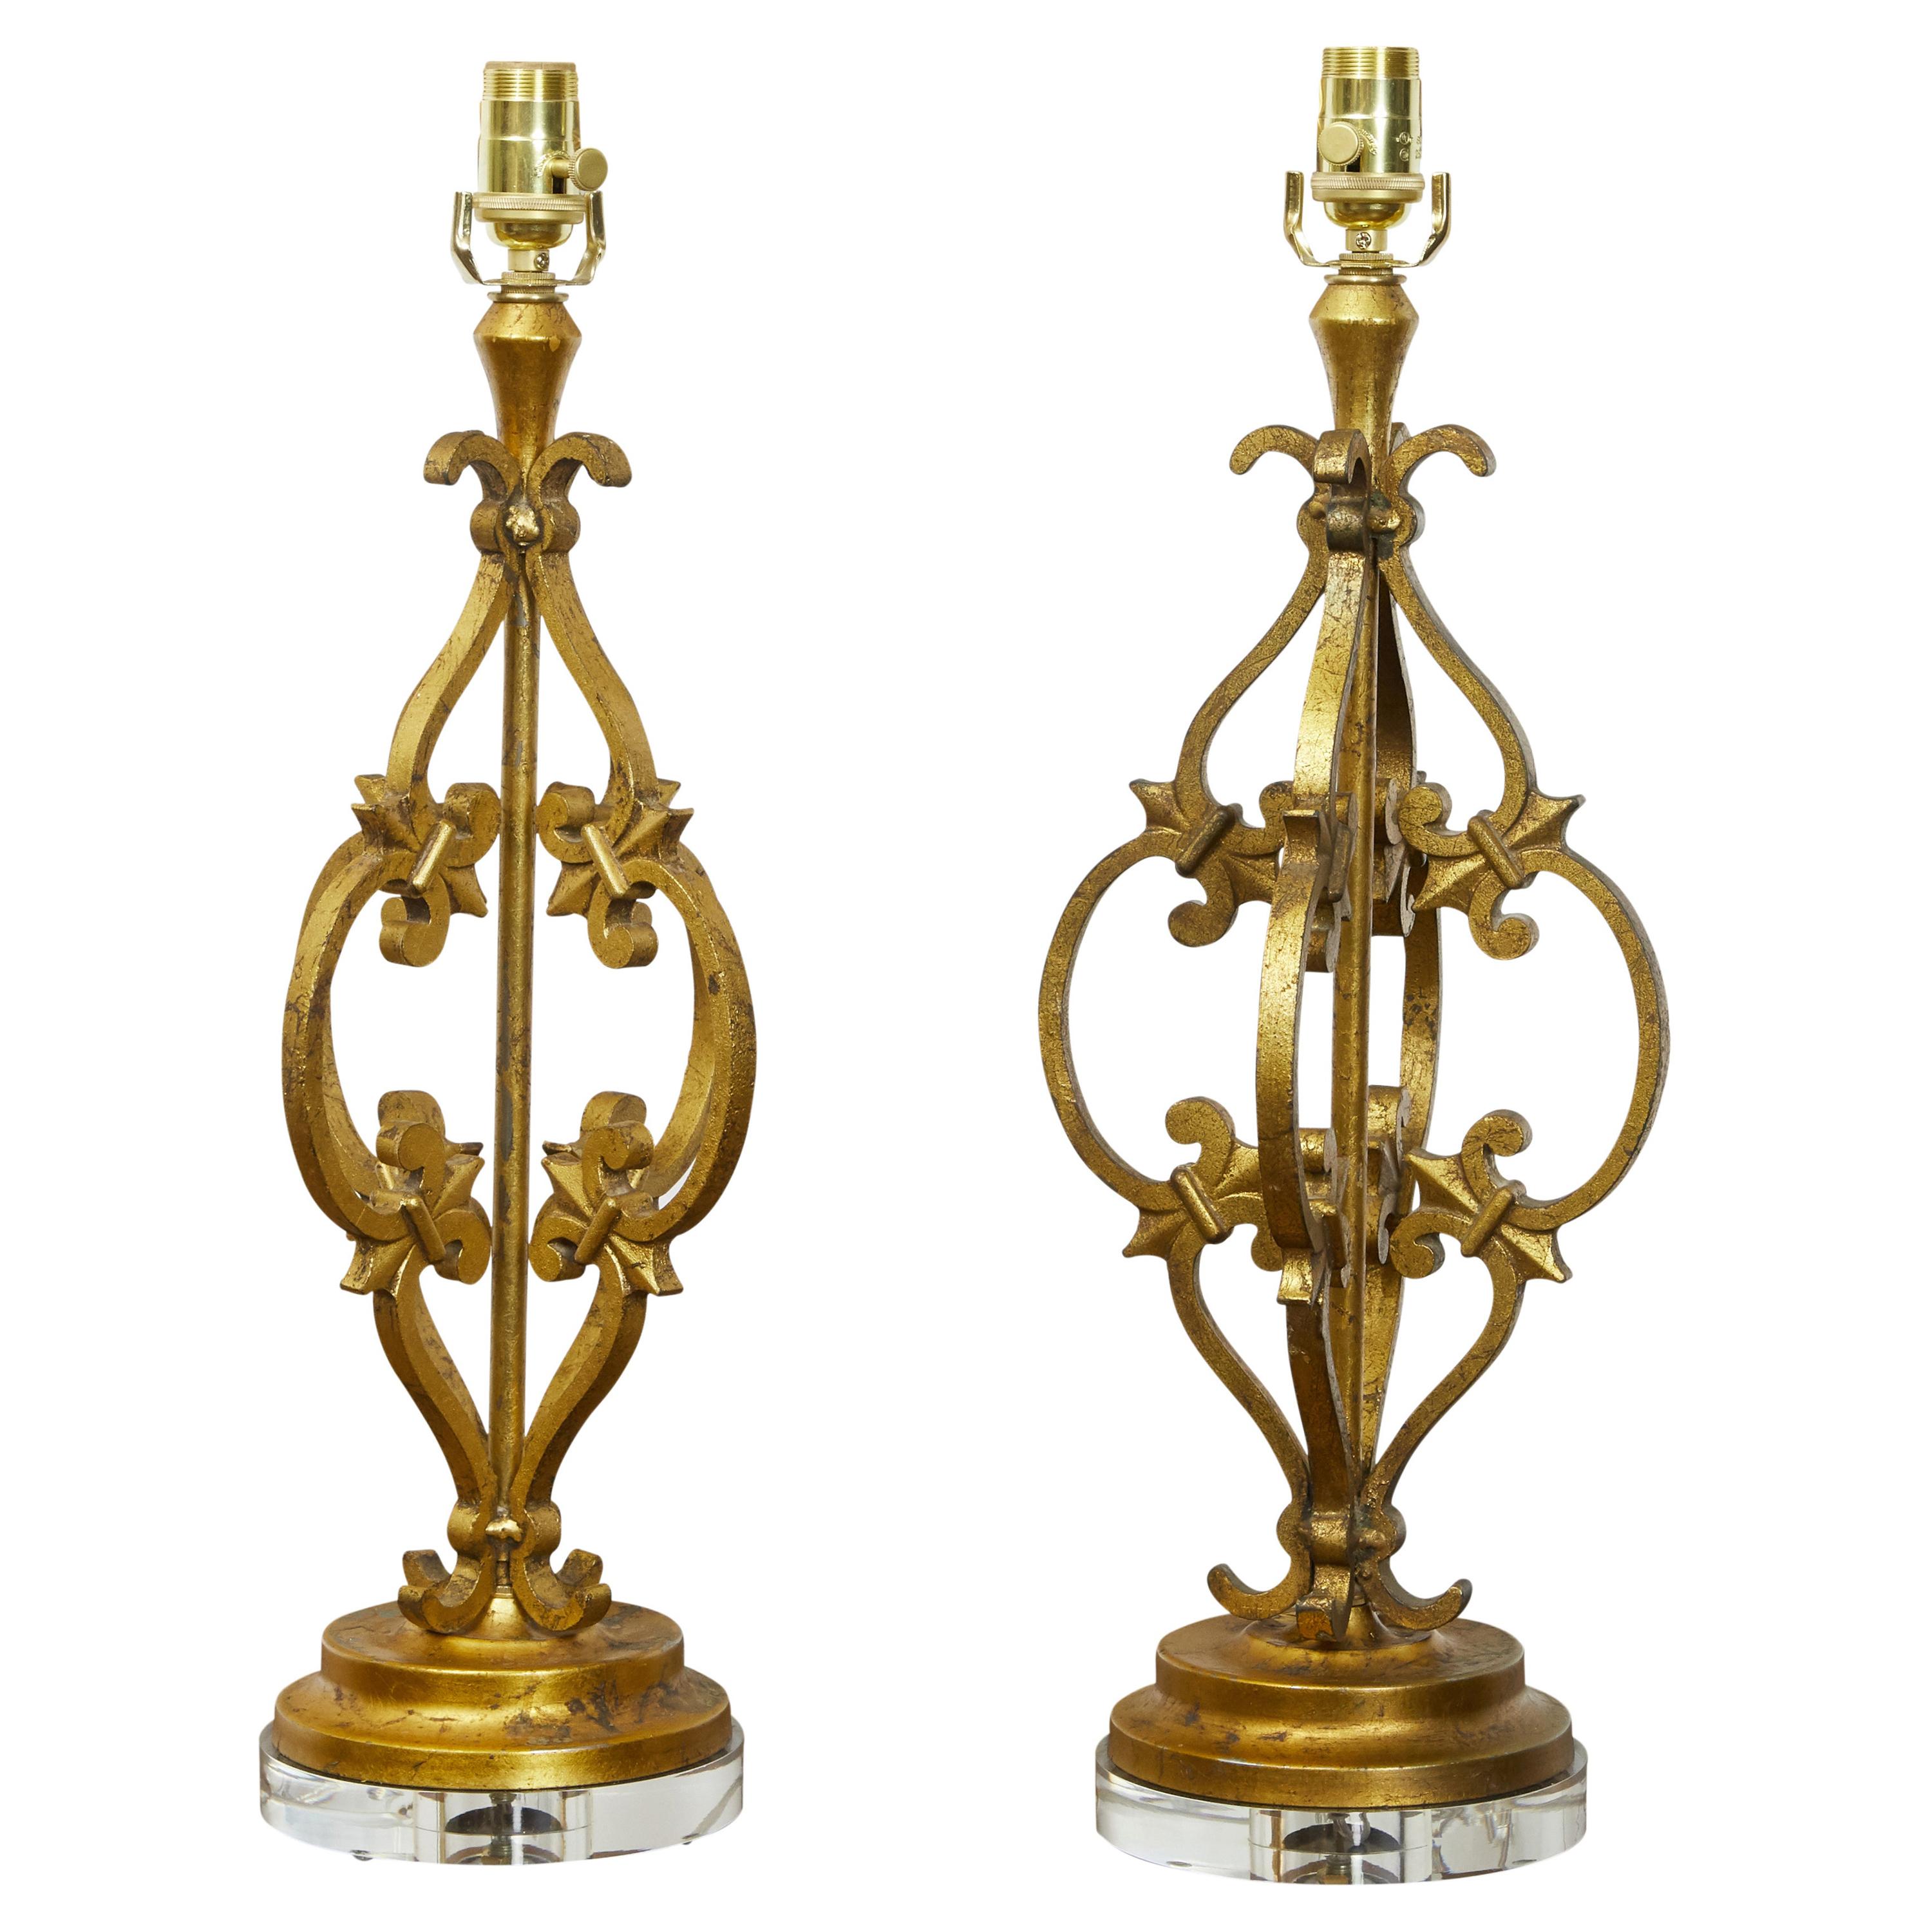 Pair of French Midcentury Gilt Metal Table Lamps with Scrolls and Fleur de Lys For Sale